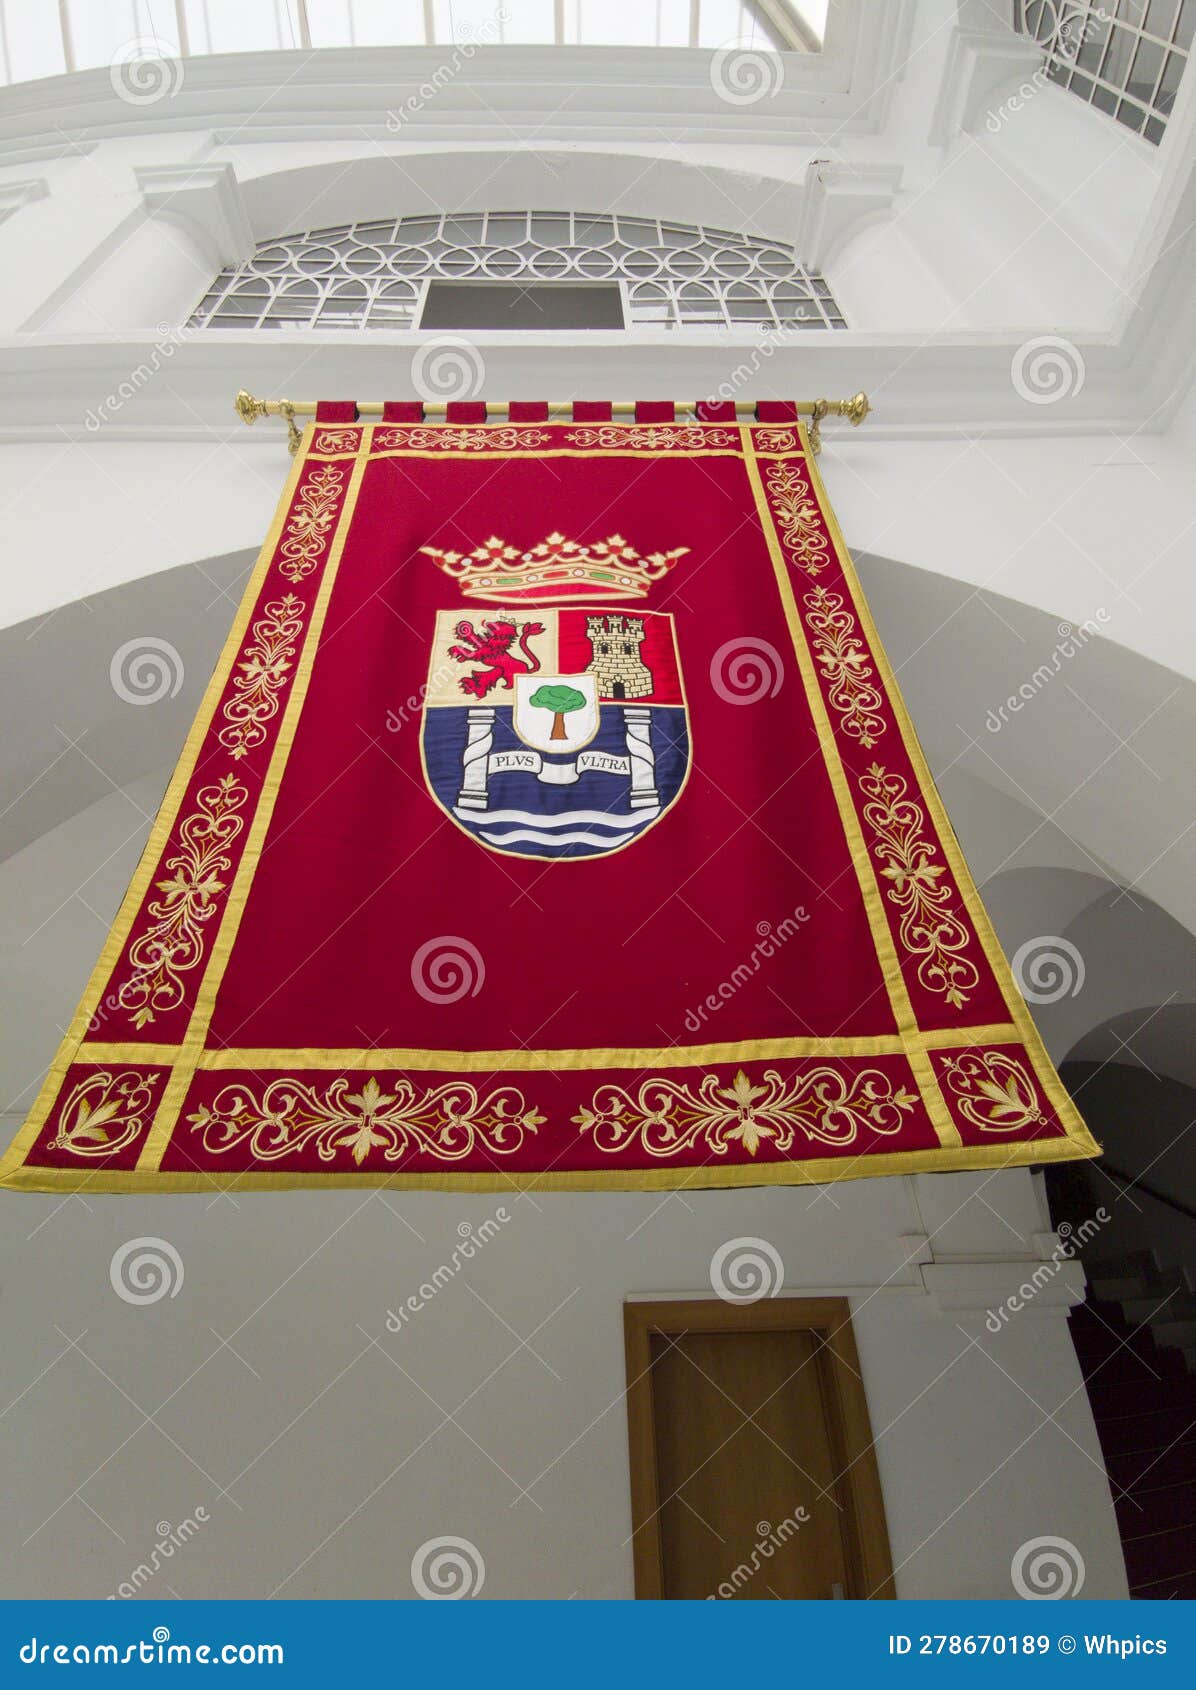 tapestry embroidered with the coat of arms of extremadura